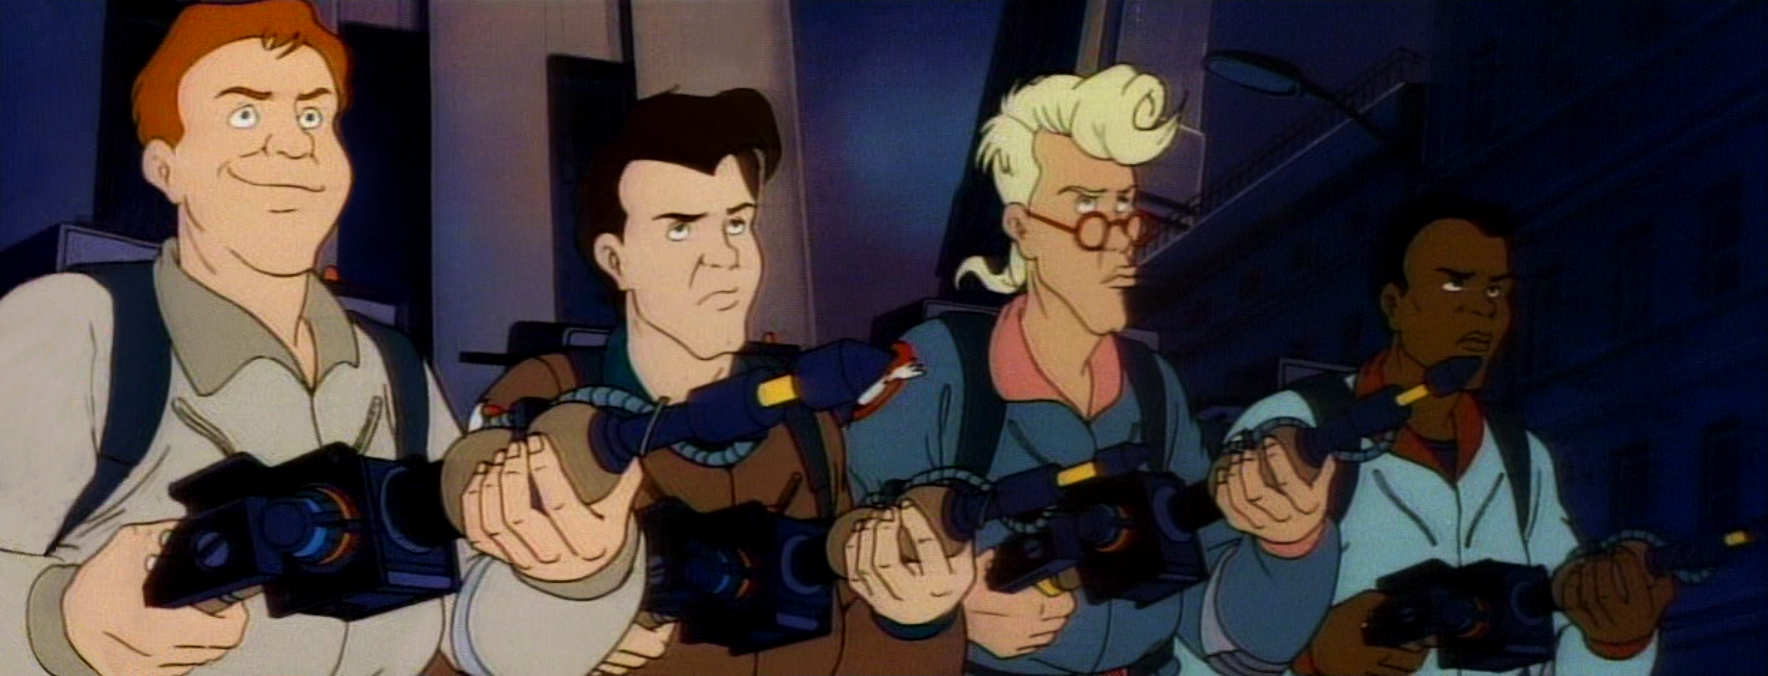 Ghostbusters Animated Movie in Development at Sony